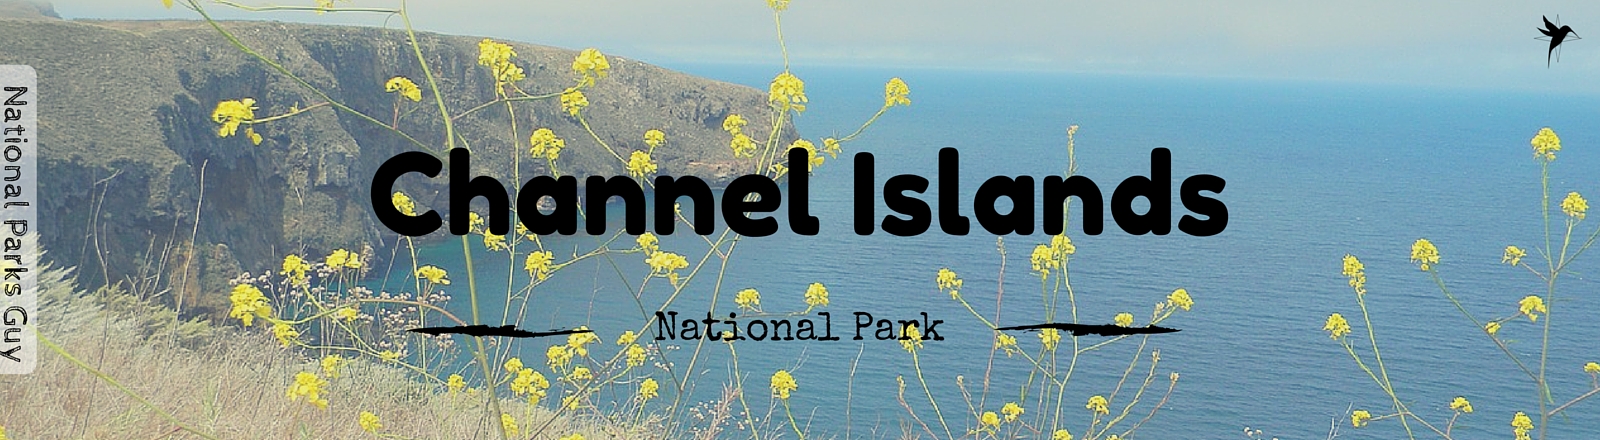 Channel Islands National Park, USA, National Parks Guy, Stories, Tales, Adventures, Wildlife